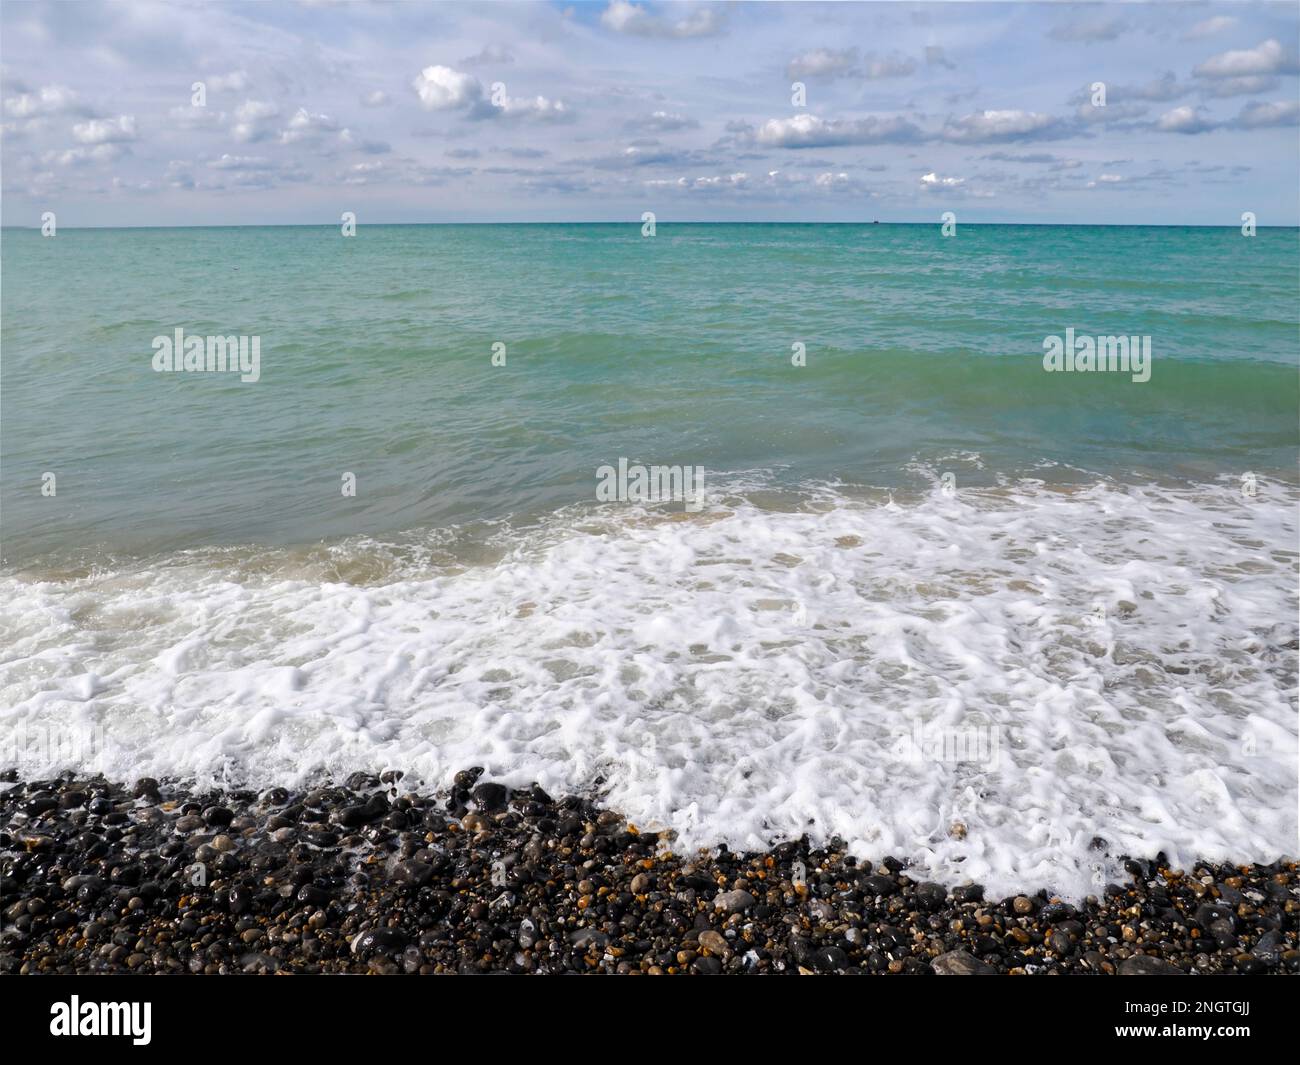 Sea and pebble beach at Le Treport, a commune in the Seine-Maritime department in Normandy, in northwestern France. Stock Photo